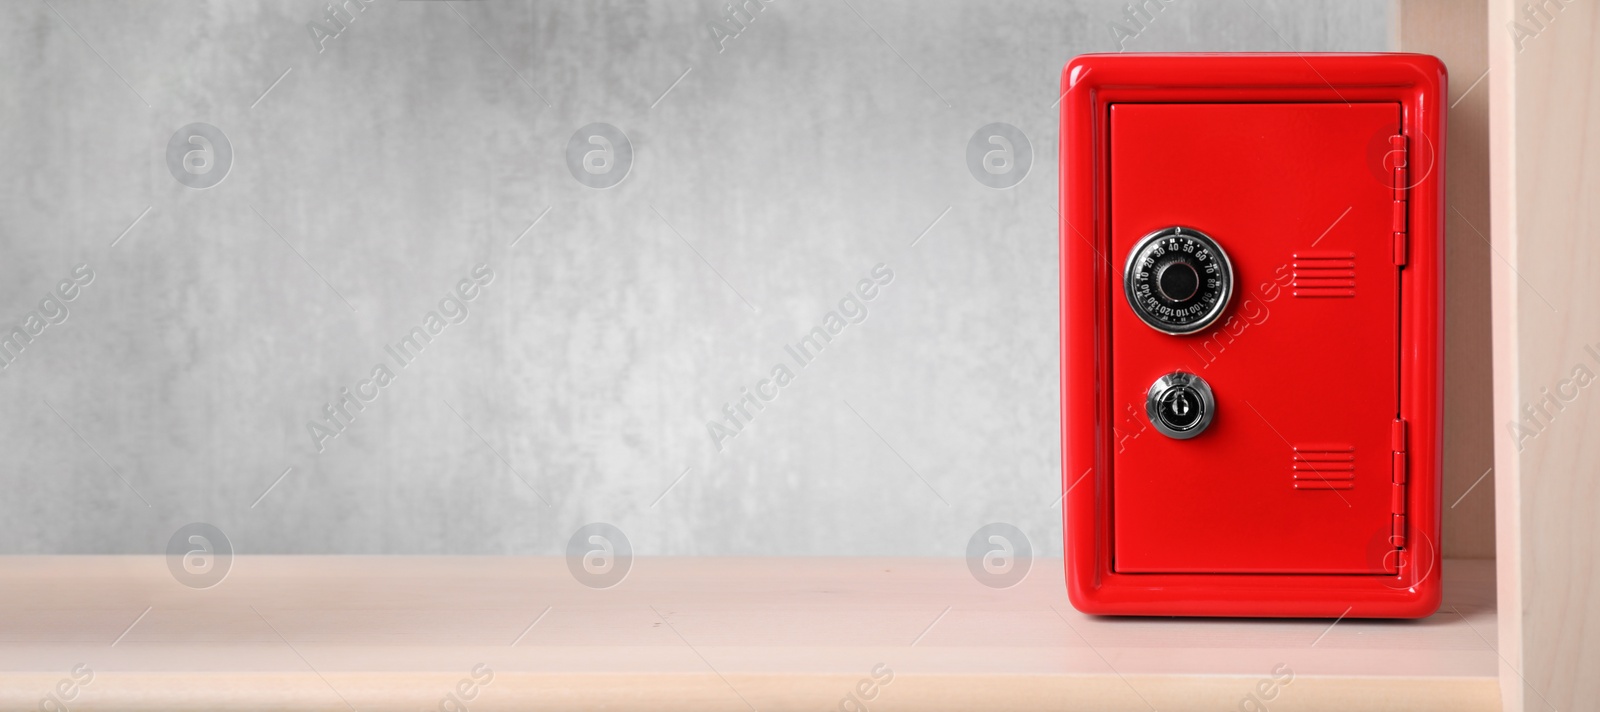 Image of Red steel safe with mechanical combination lock on shelf, banner design. Space for text